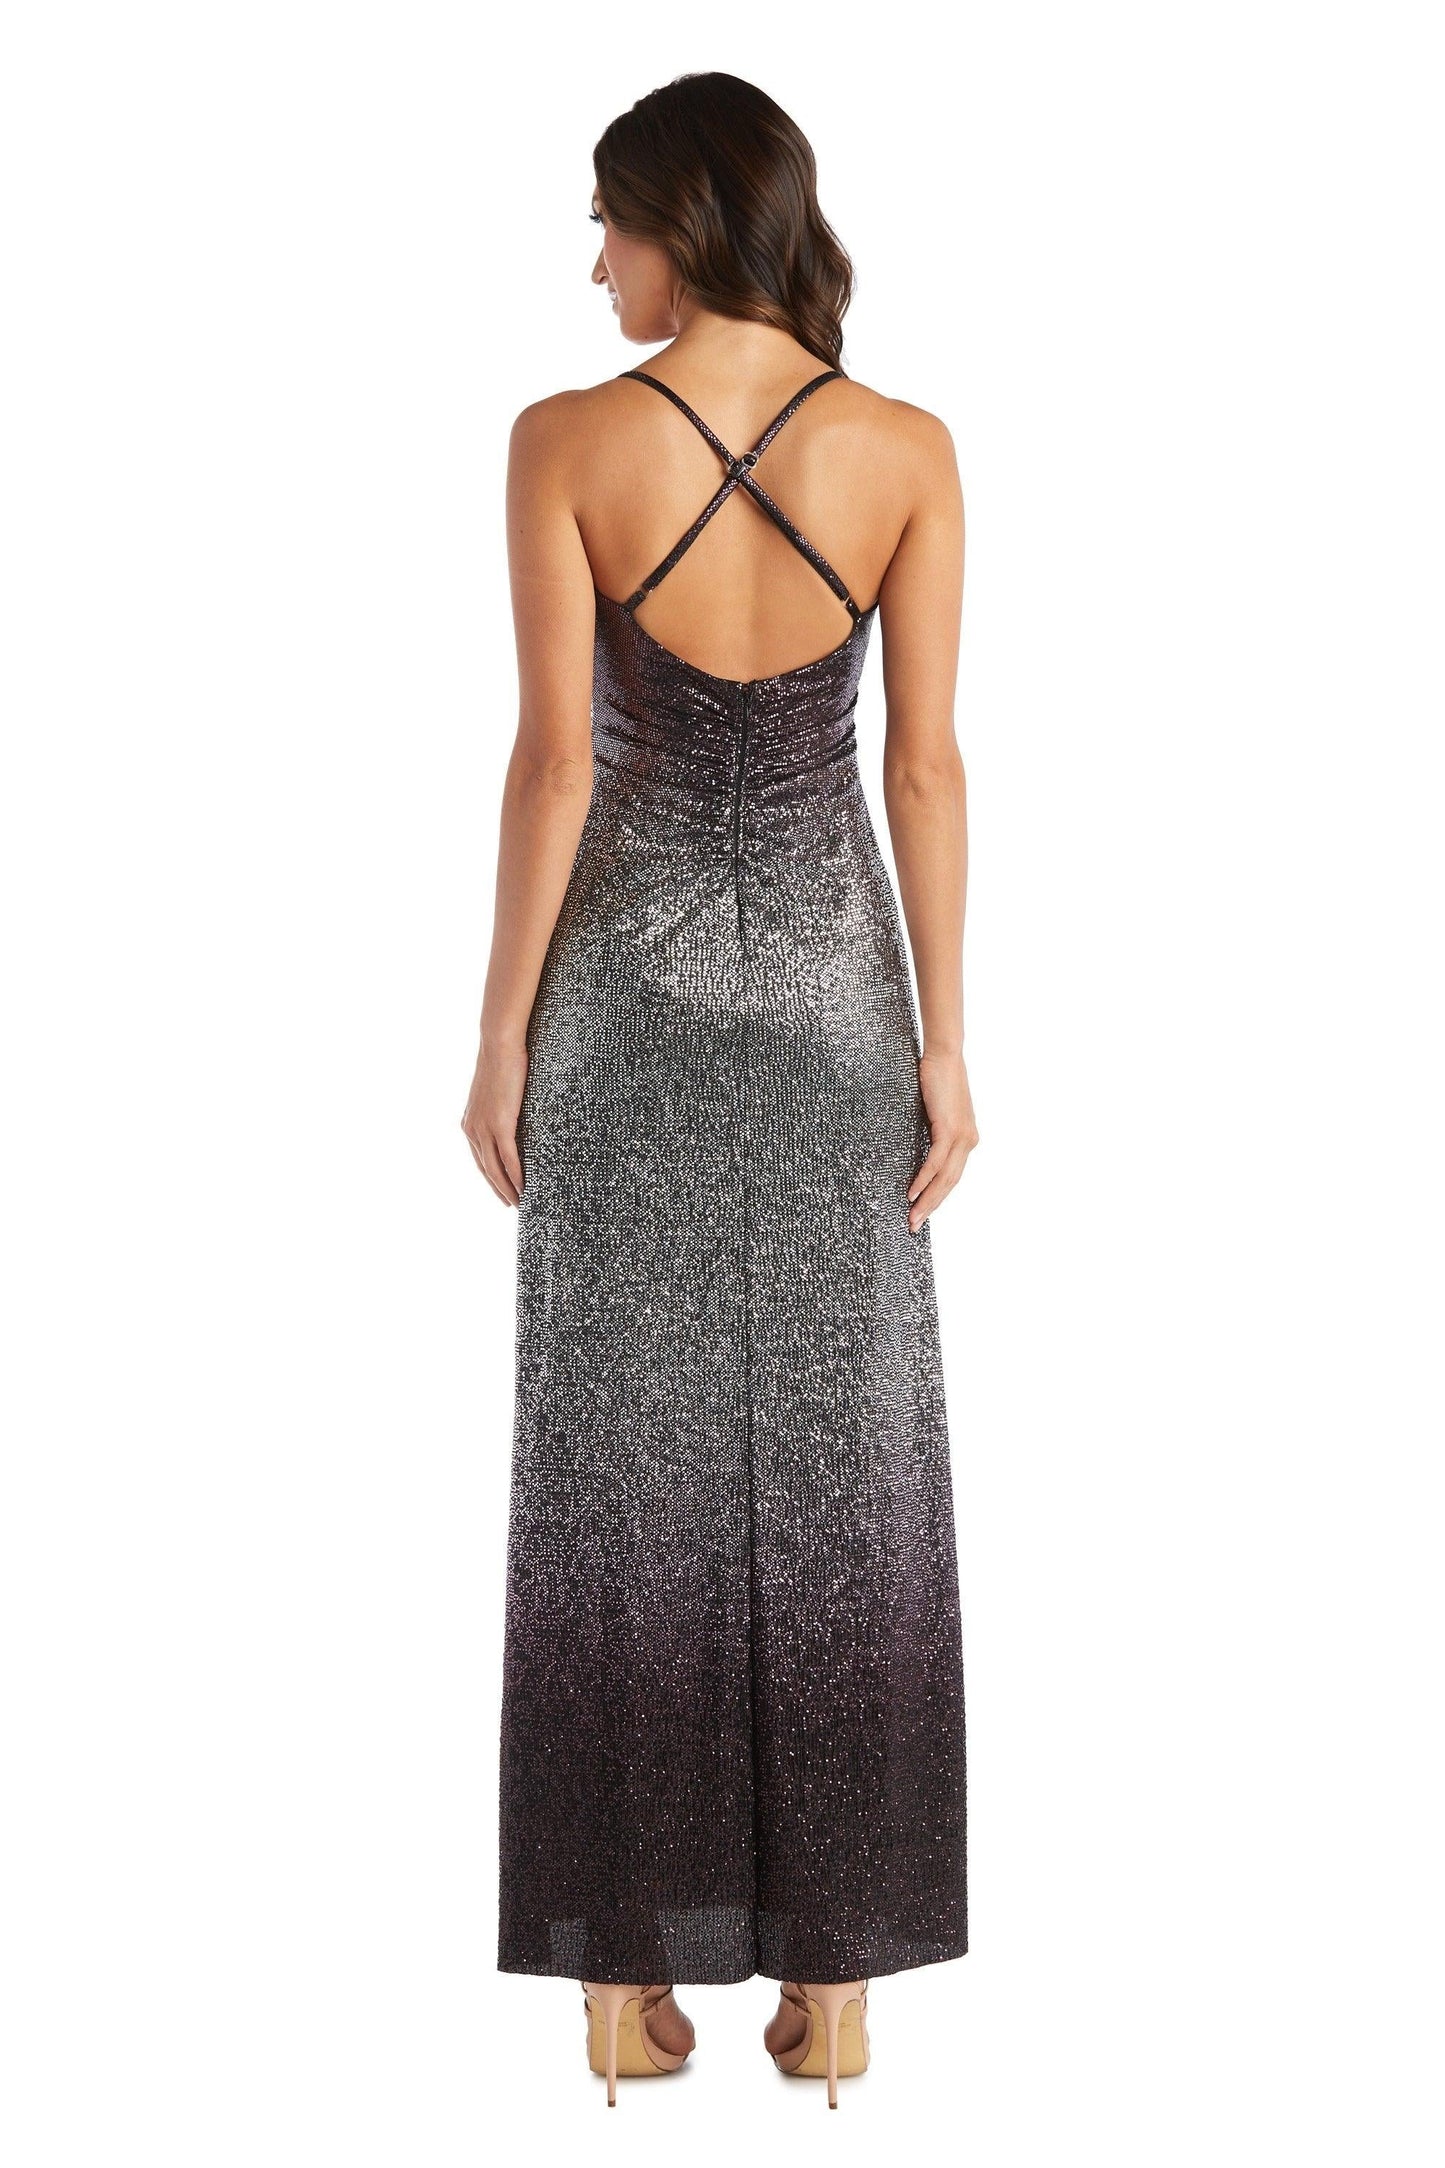 Nightway Long Formal Ombre Dress Sale 21970 - The Dress Outlet